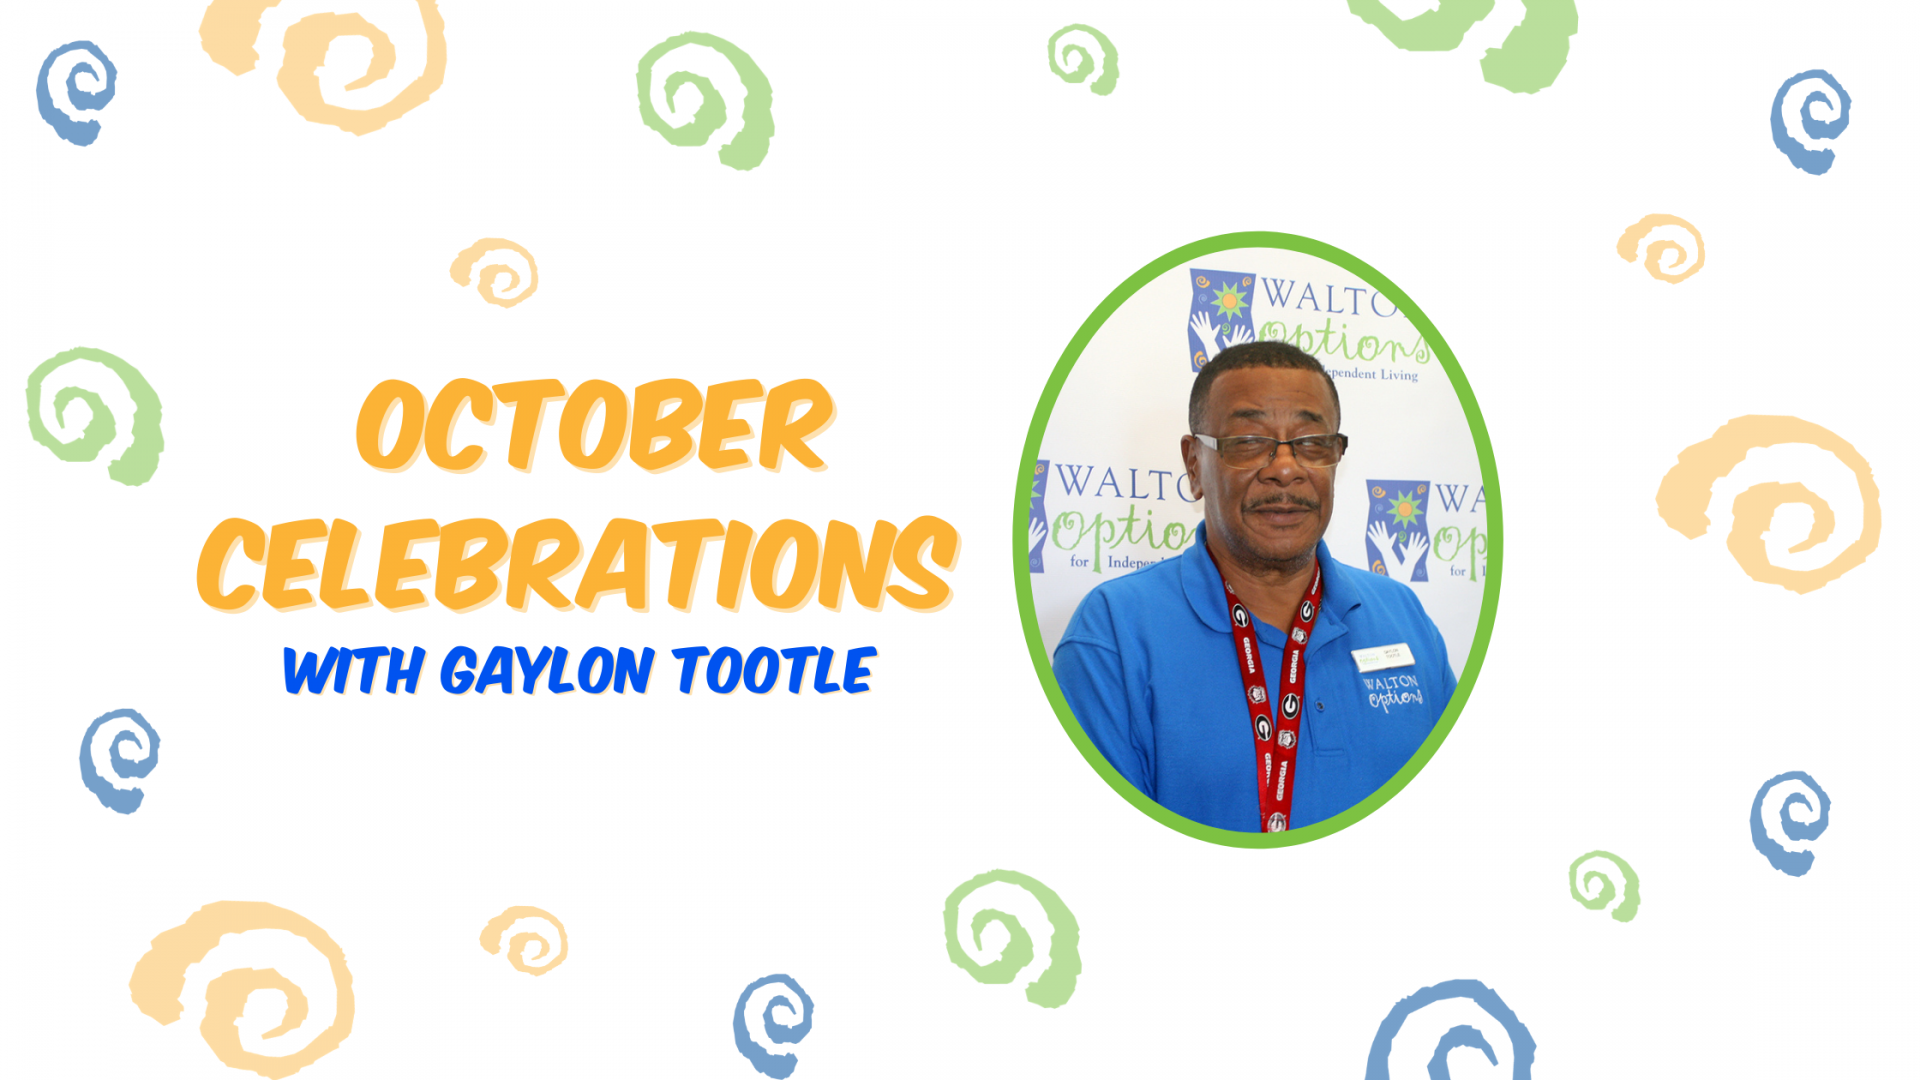 Title Image that reads, "October Celebrations with Gaylon Tootle" An image of a man wearing glasses and a blue shirts sits beside the words.